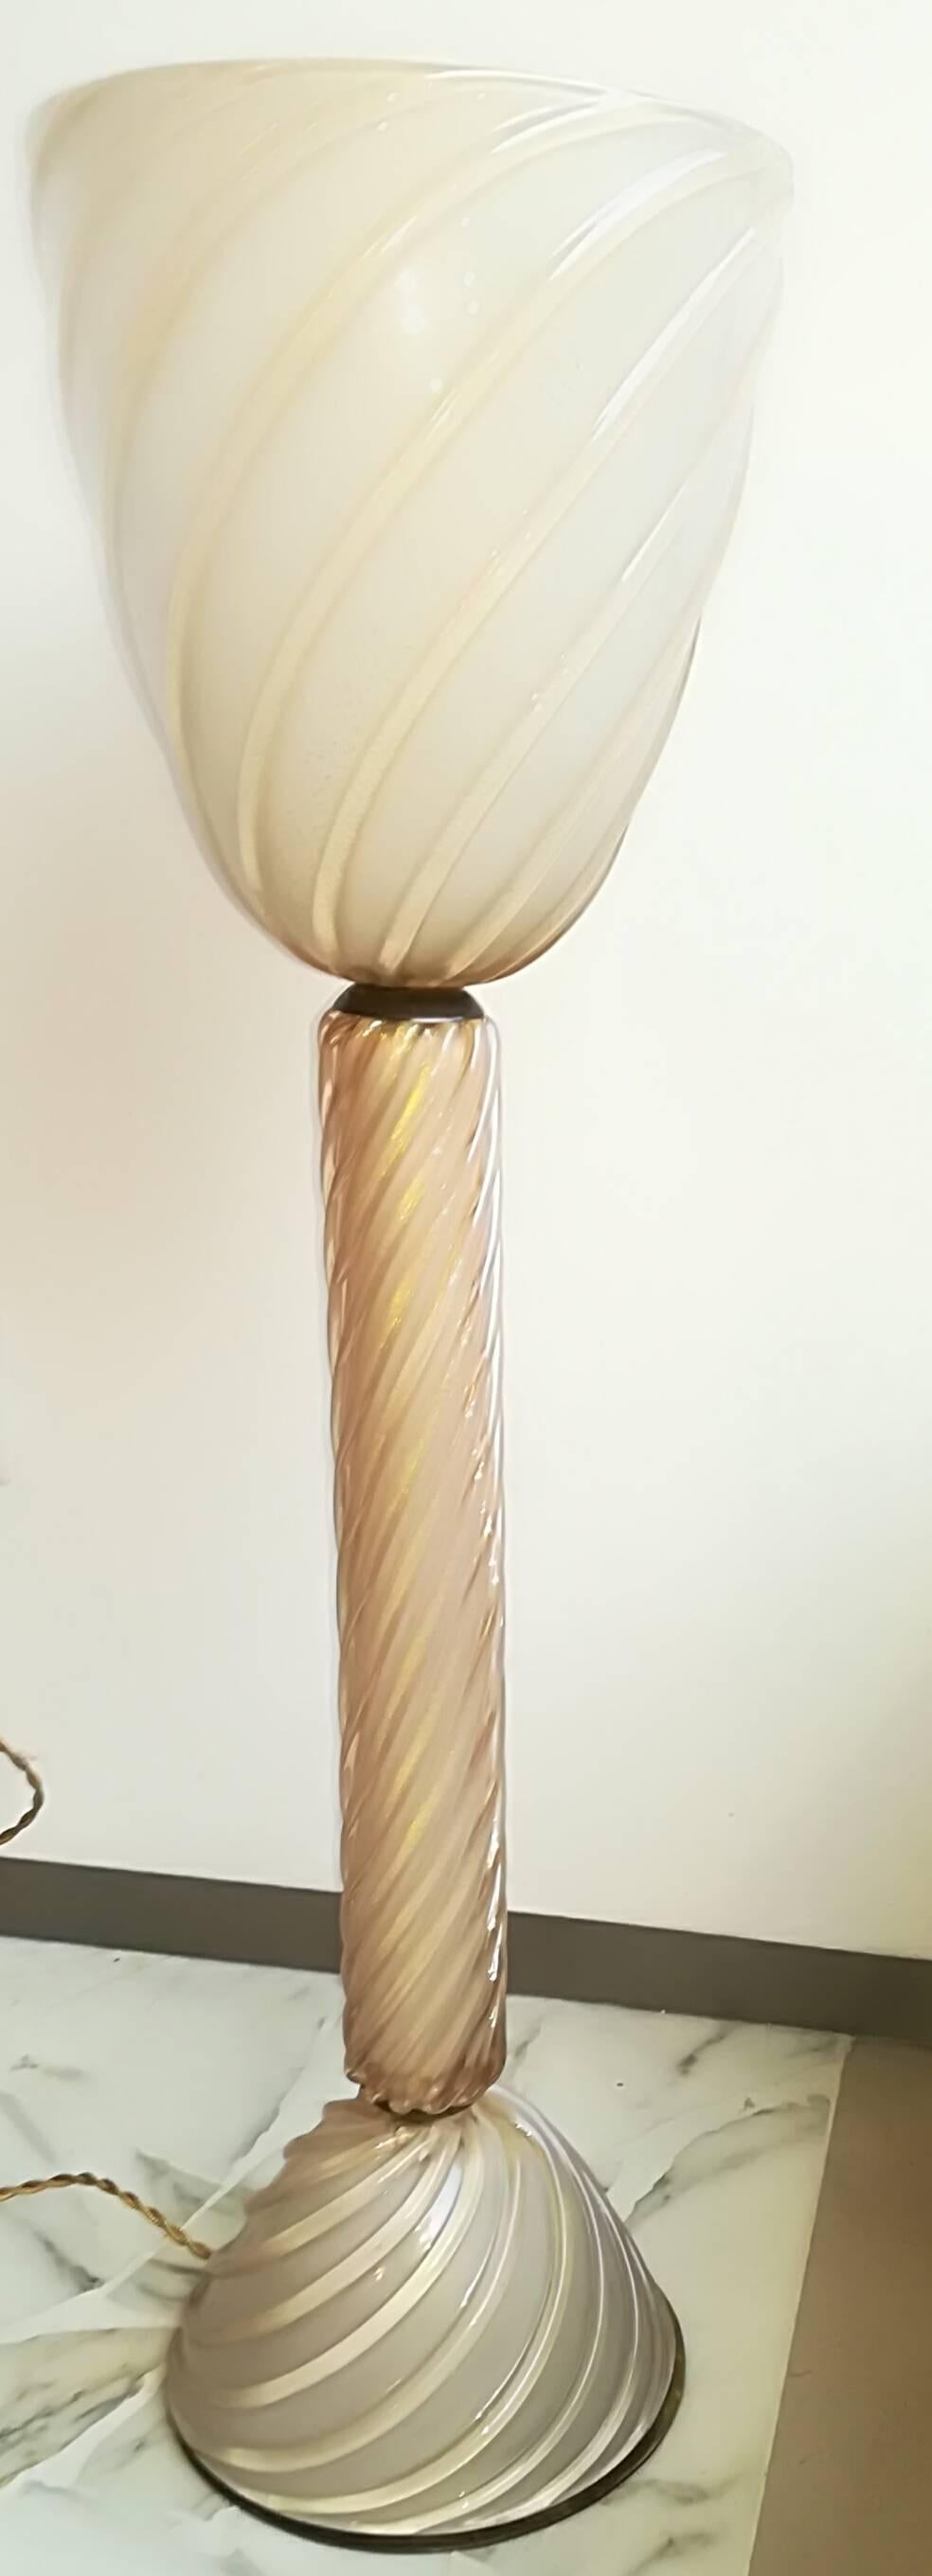 Seguso 1950, Table Lamp, Murano Glass, Gold Avory Color In Excellent Condition For Sale In Milano, IT